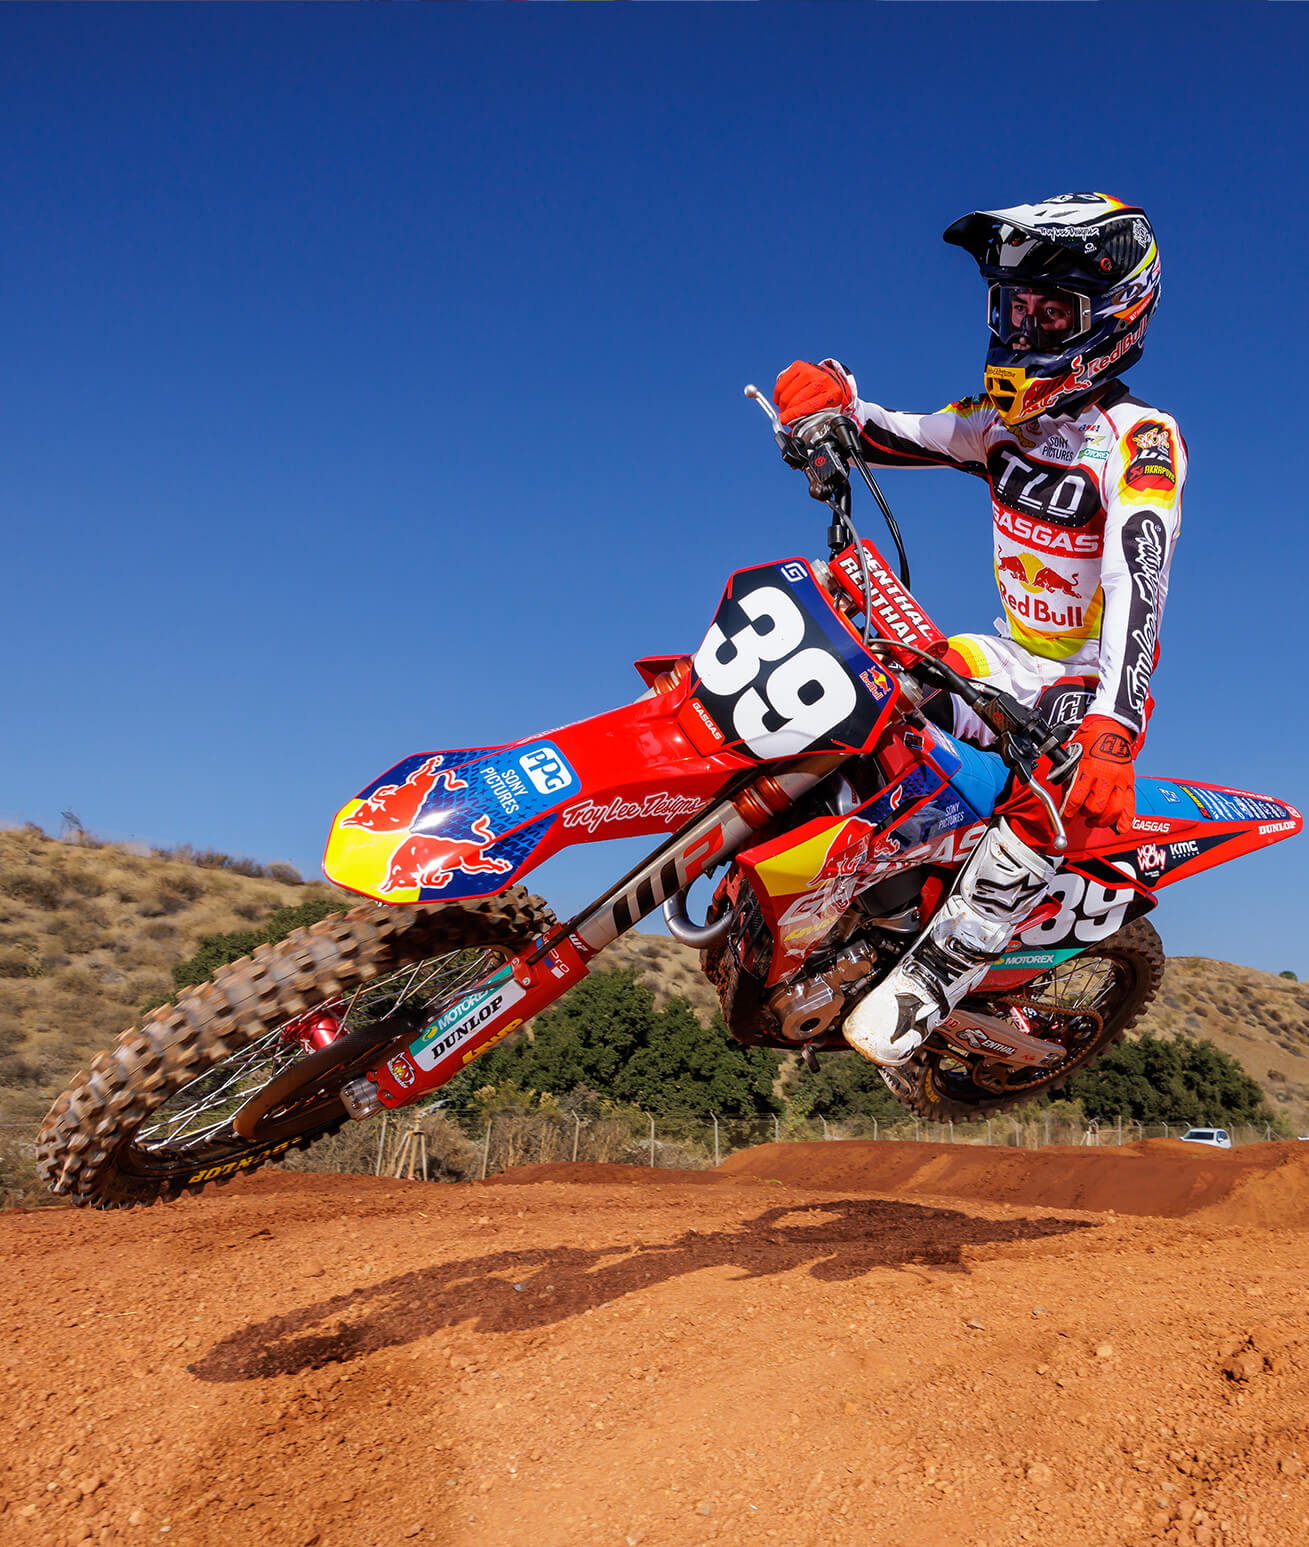 Marvin Musquin on a KTM Bike